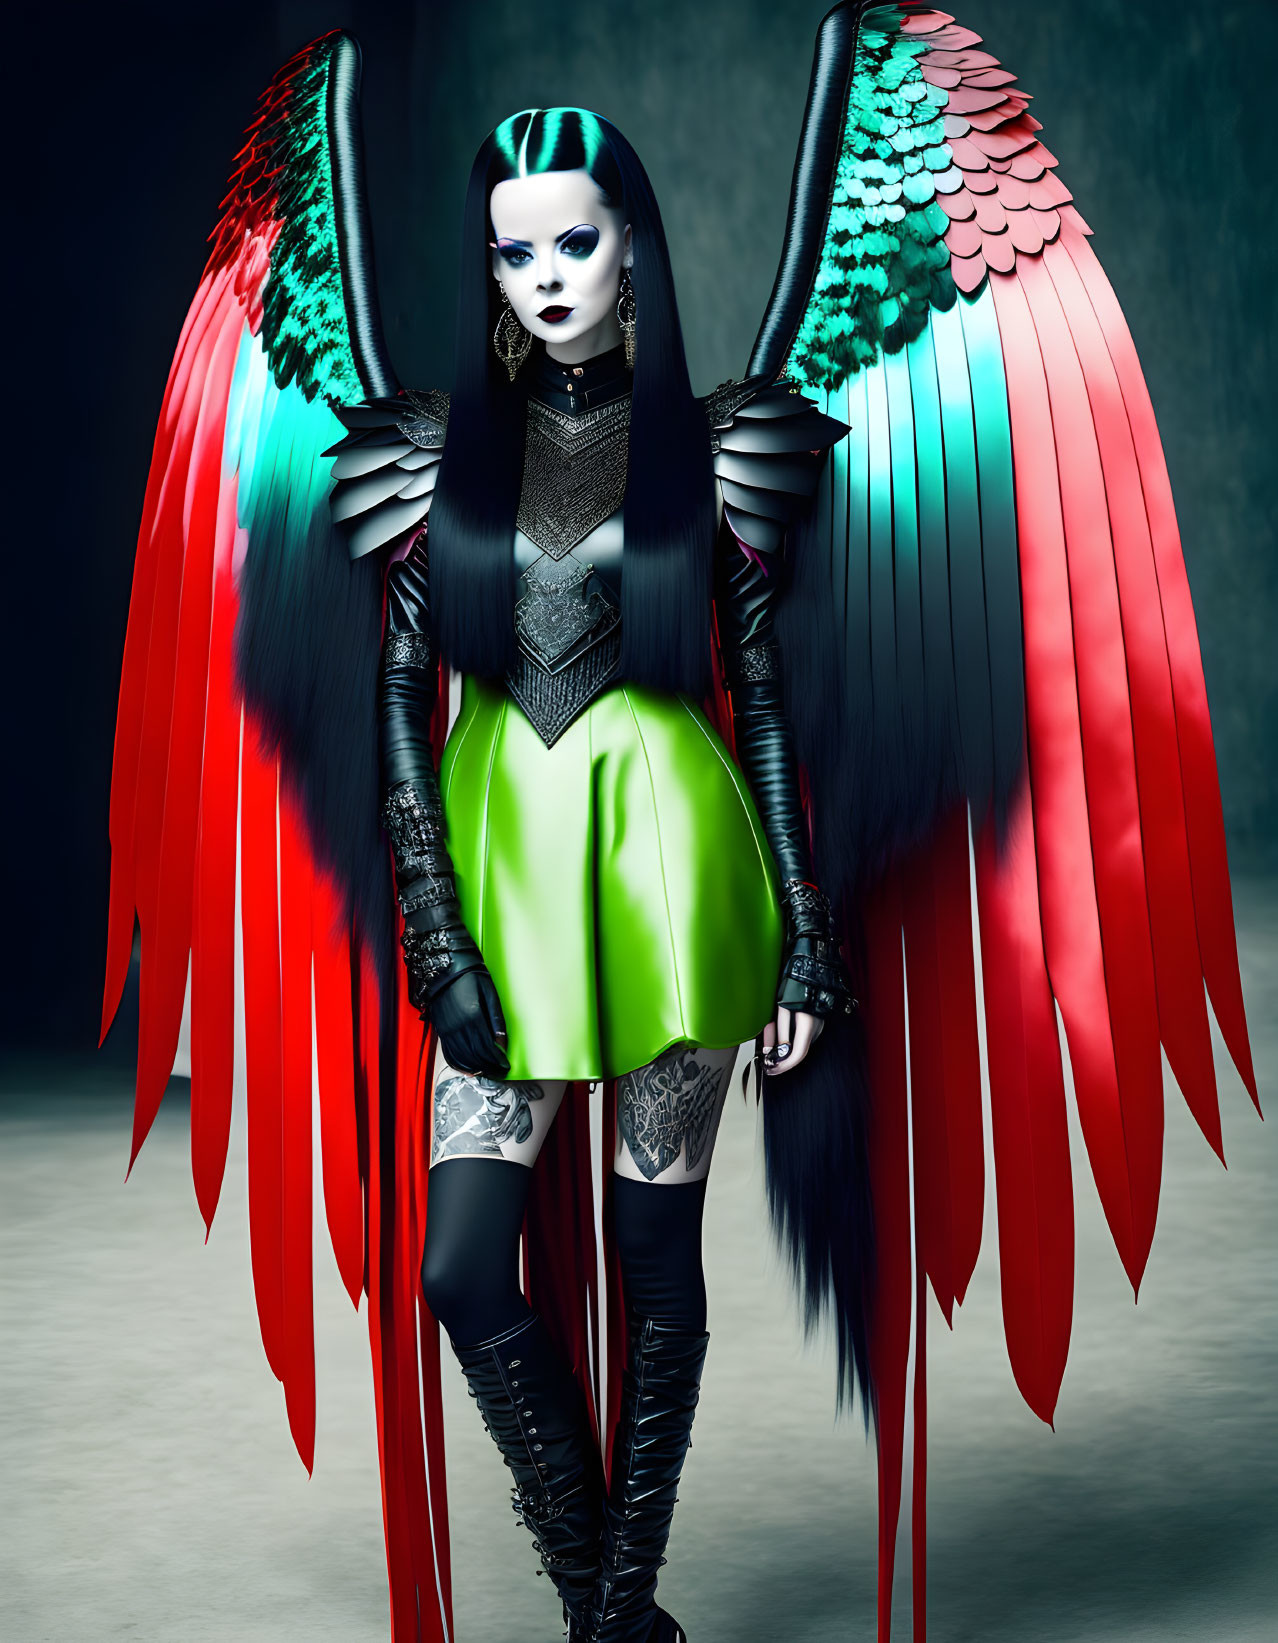 Person with Red and Black Wings in Green Skirt and Thigh-High Boots